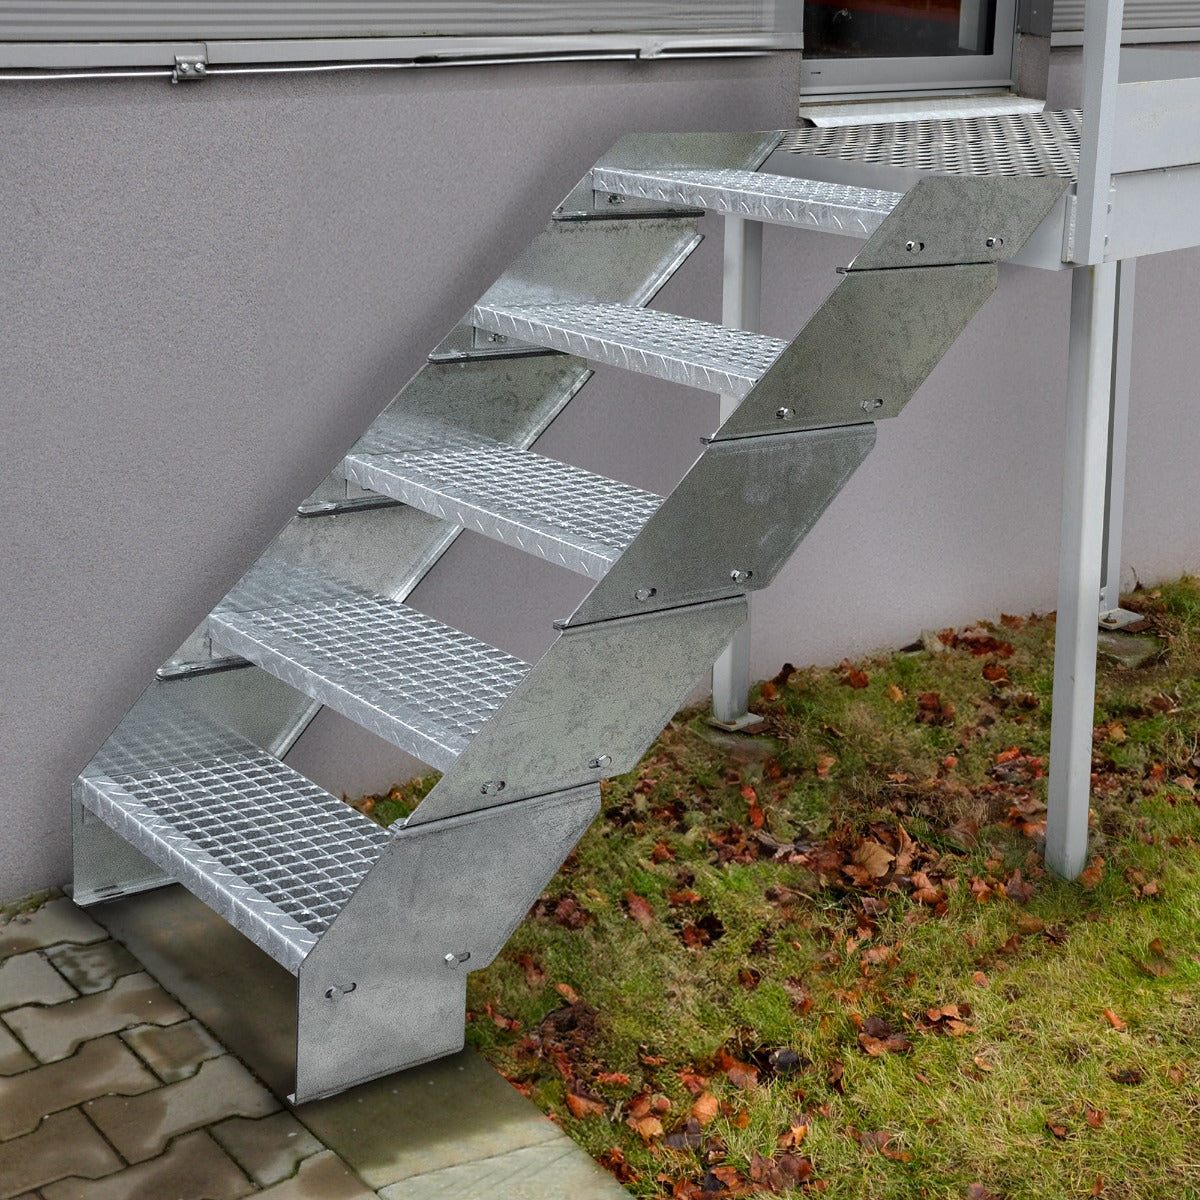 Adjustable 12 Section Galvanised Staircase - 900mm Wide